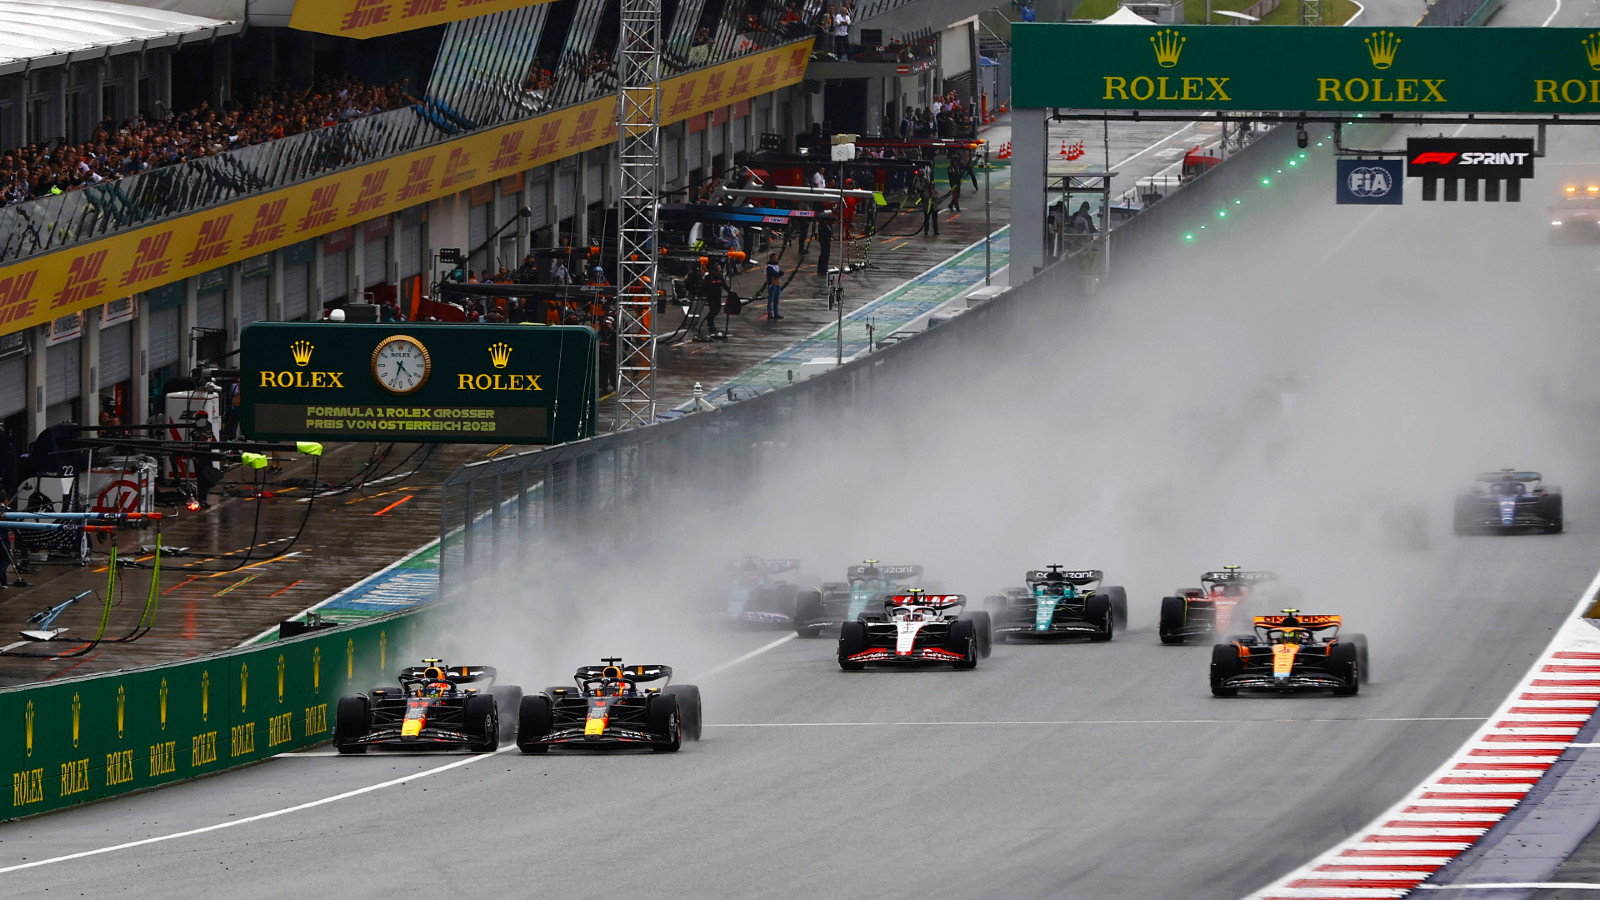 The one team to watch at Silverstone as Red Bull aim to lift British GP curse PlanetF1